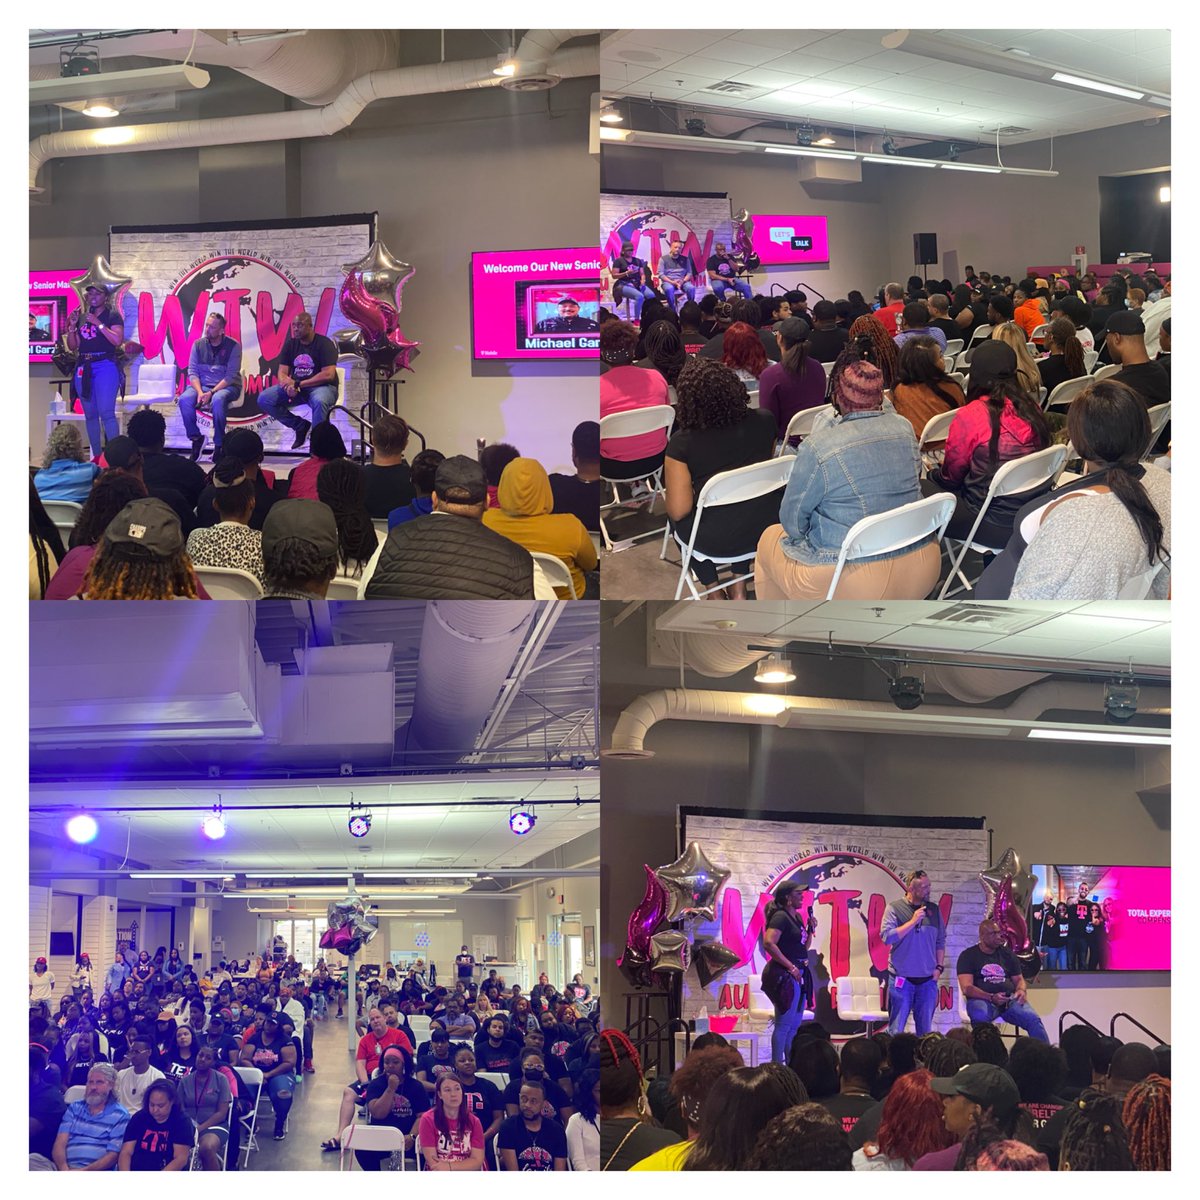 Our teams are FIRED UP! We had an amazing day unveiling our game changing Total Experience across our Retail, Care, and Engineering teams! There is no stopping us! #Georgia #NorthFlorida #TotalExperience #MightySouth @m_wan4life @RyanShiell @cjgreentx @JonFreier @marknolanmfn